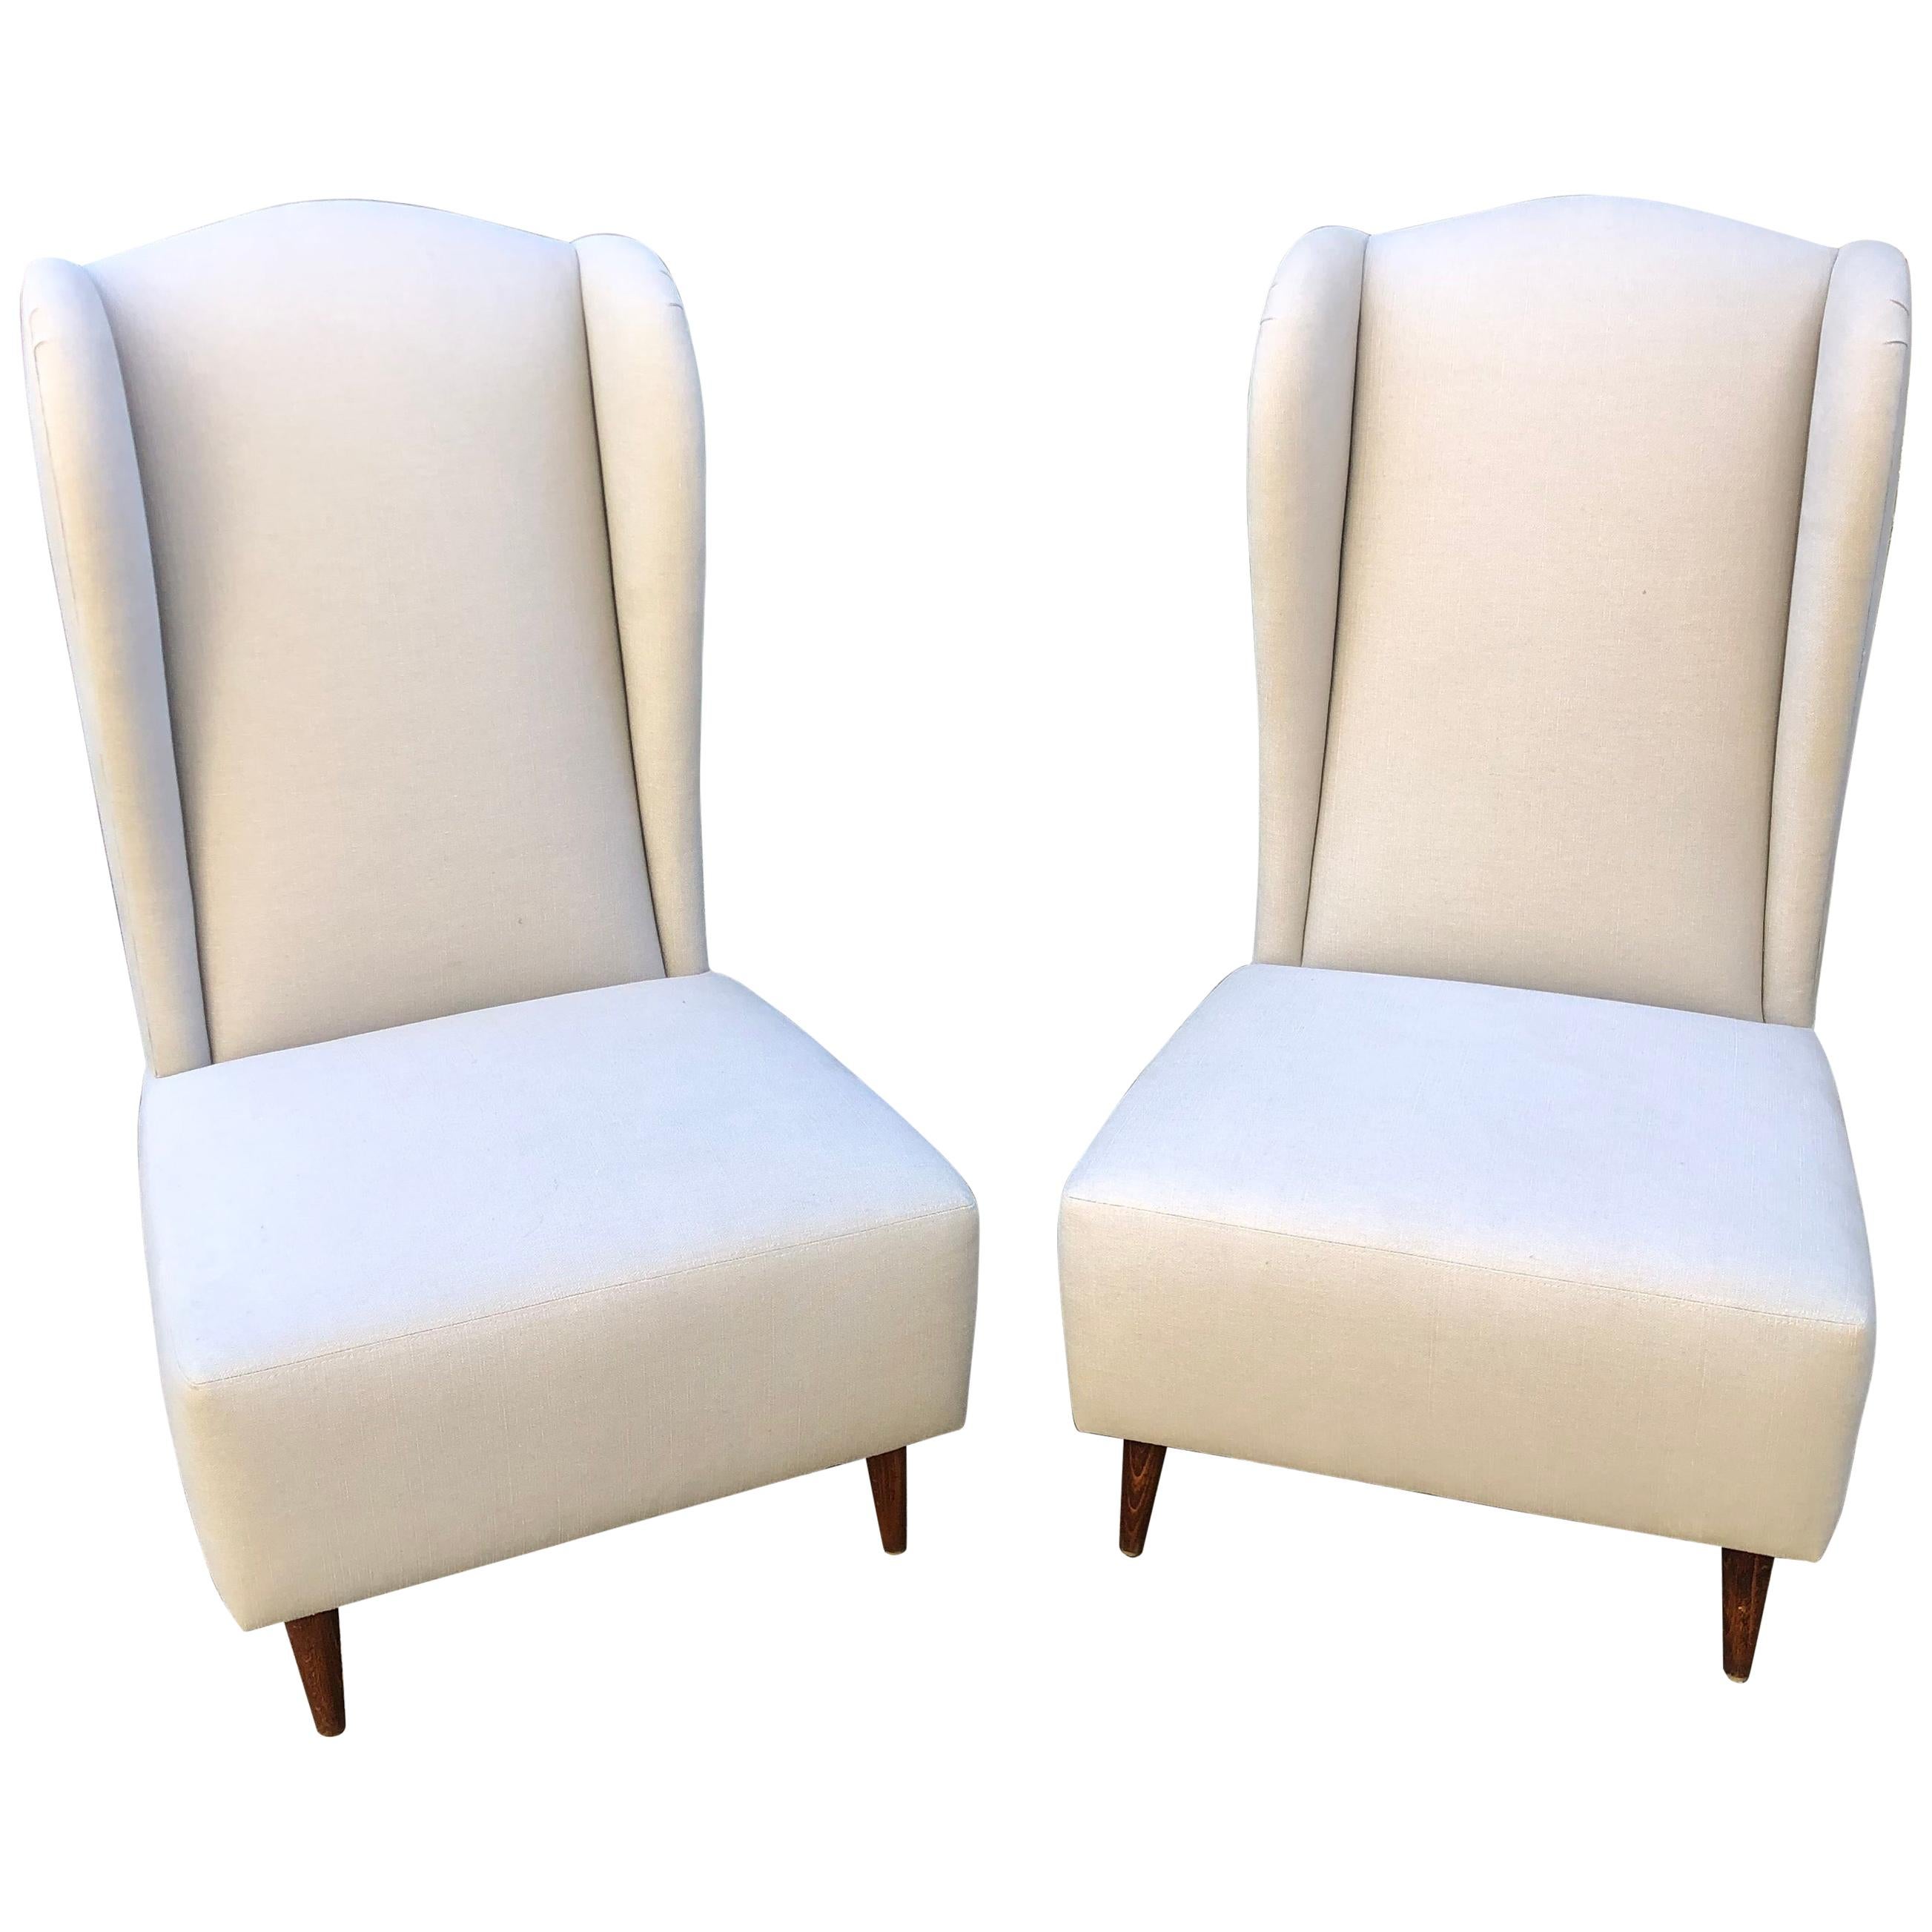 Pair of Wing Back Slipper Chairs